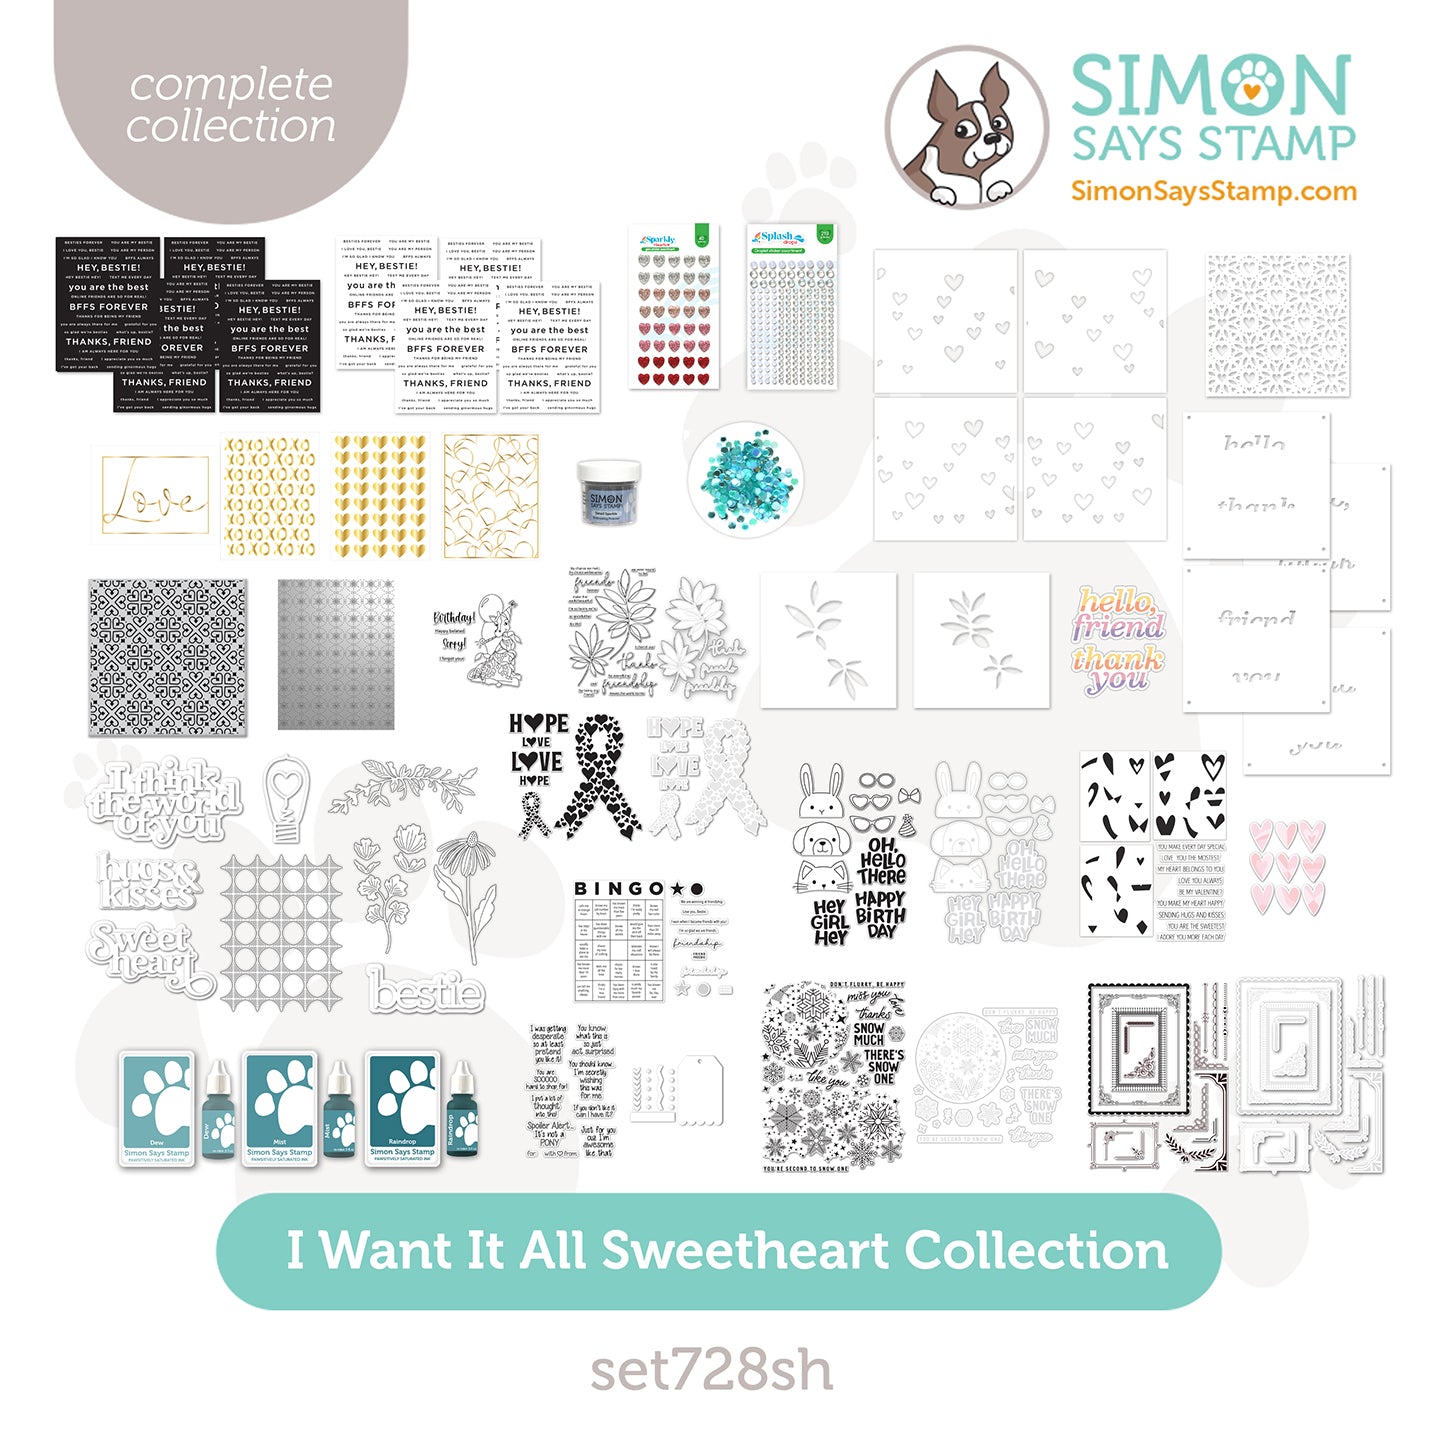 Simon Says Stamps And Dies My Love Greetings Smitten